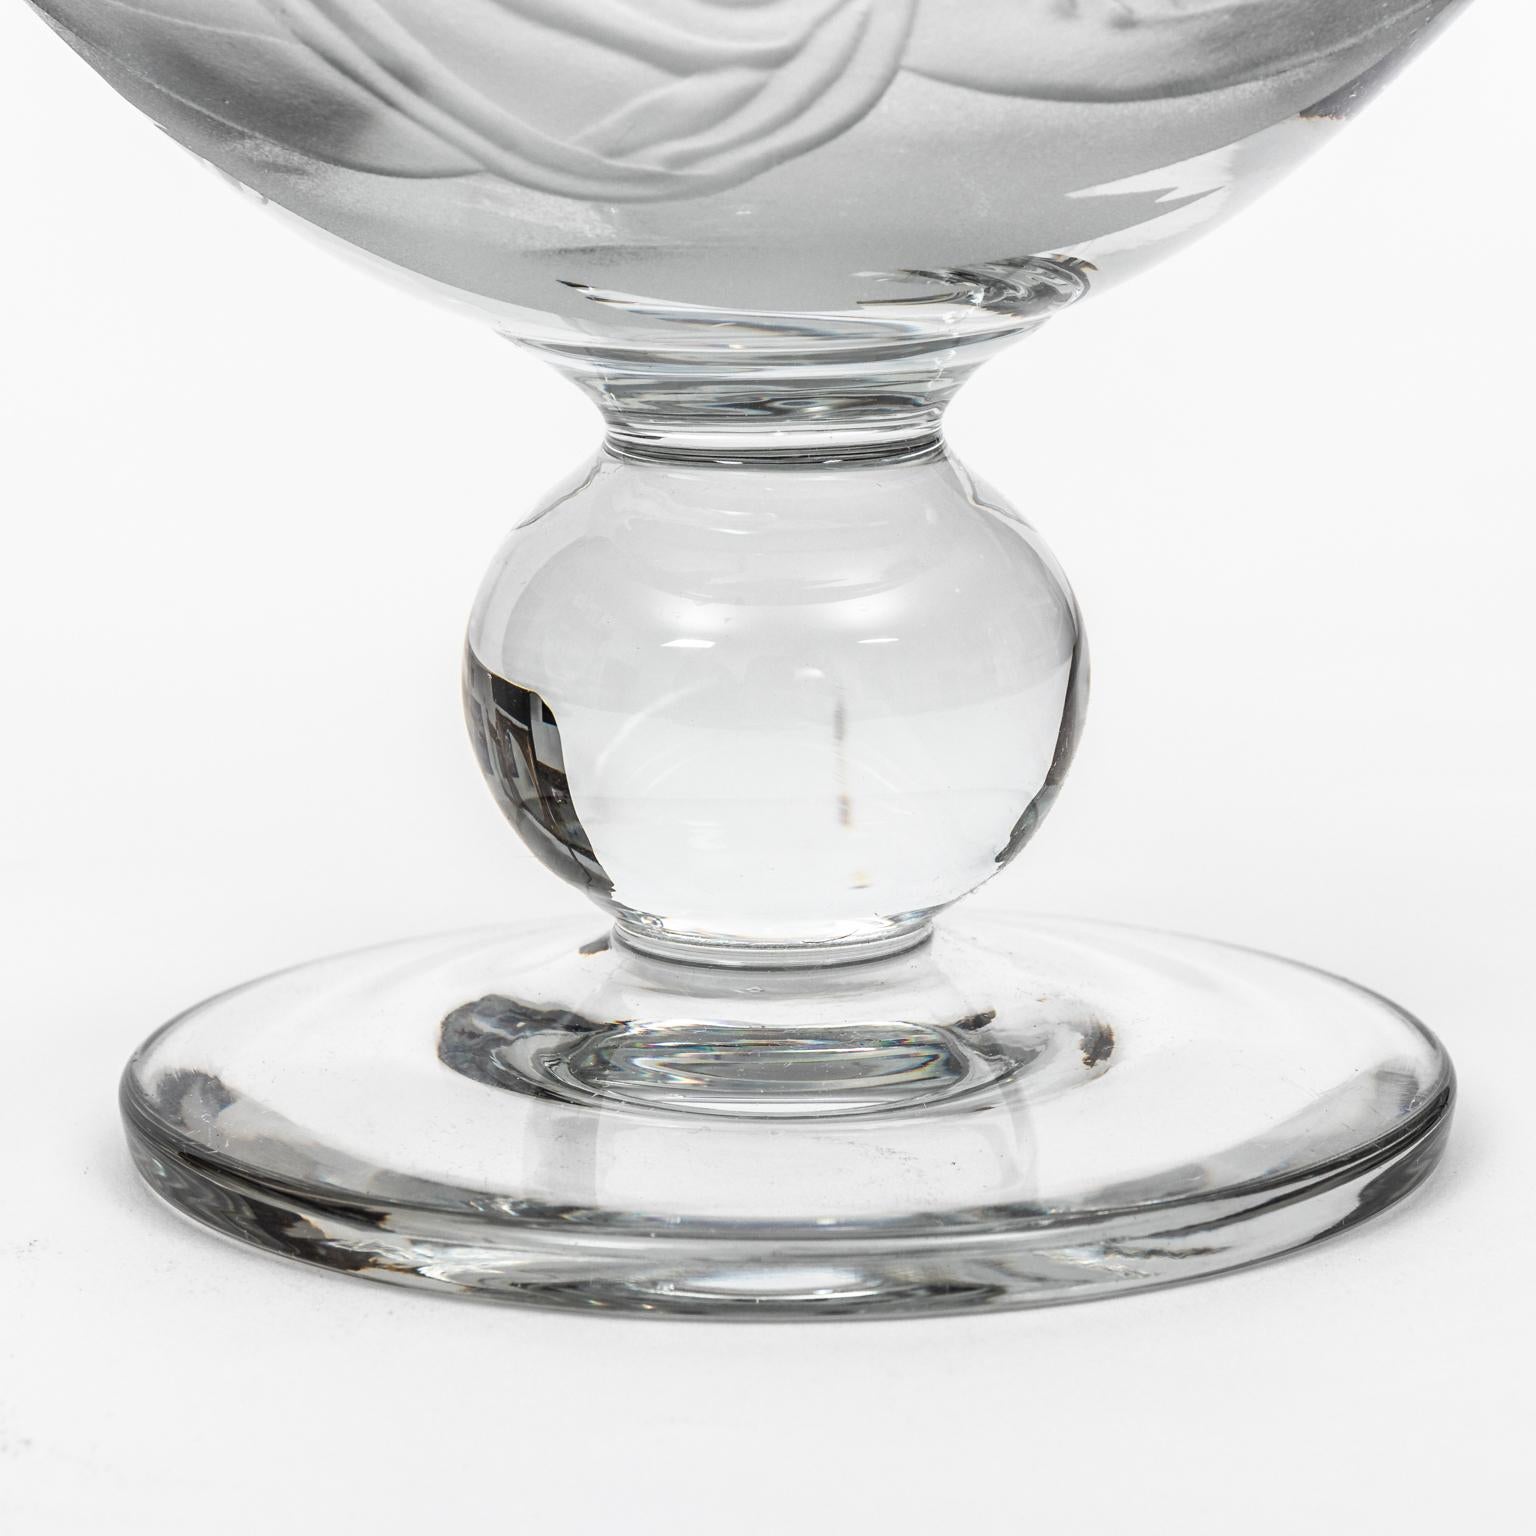 Dorothy Thorpe midcentury matching compotes. Art Deco etchings. Crystal. Discontinued. Made in the United States. Please note of wear consistent with age. No damages. Measures: 7.75 Inches diameter at the opening. 4.375 Inches wide at the base.